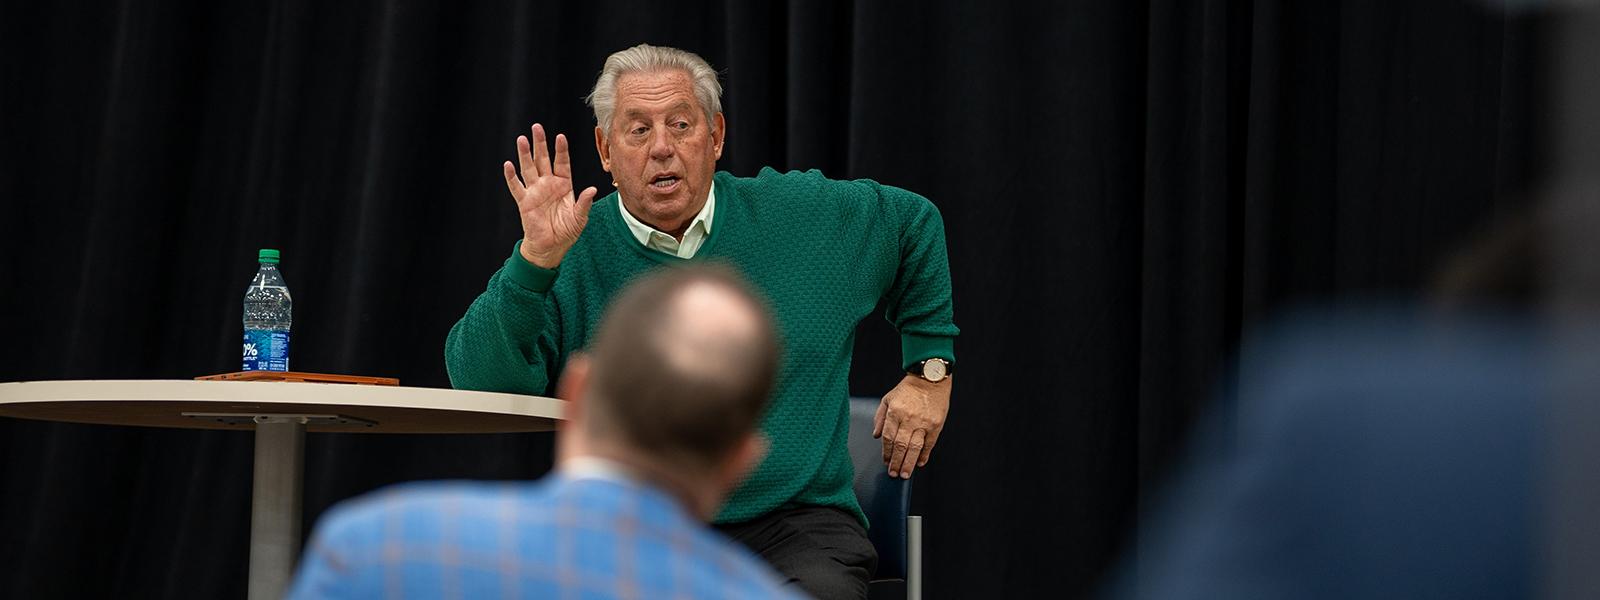 Dr. John Maxwell discusses "How to Get Out of the People Pile" with Columbia area leaders. (Photo by Noah Allard) 